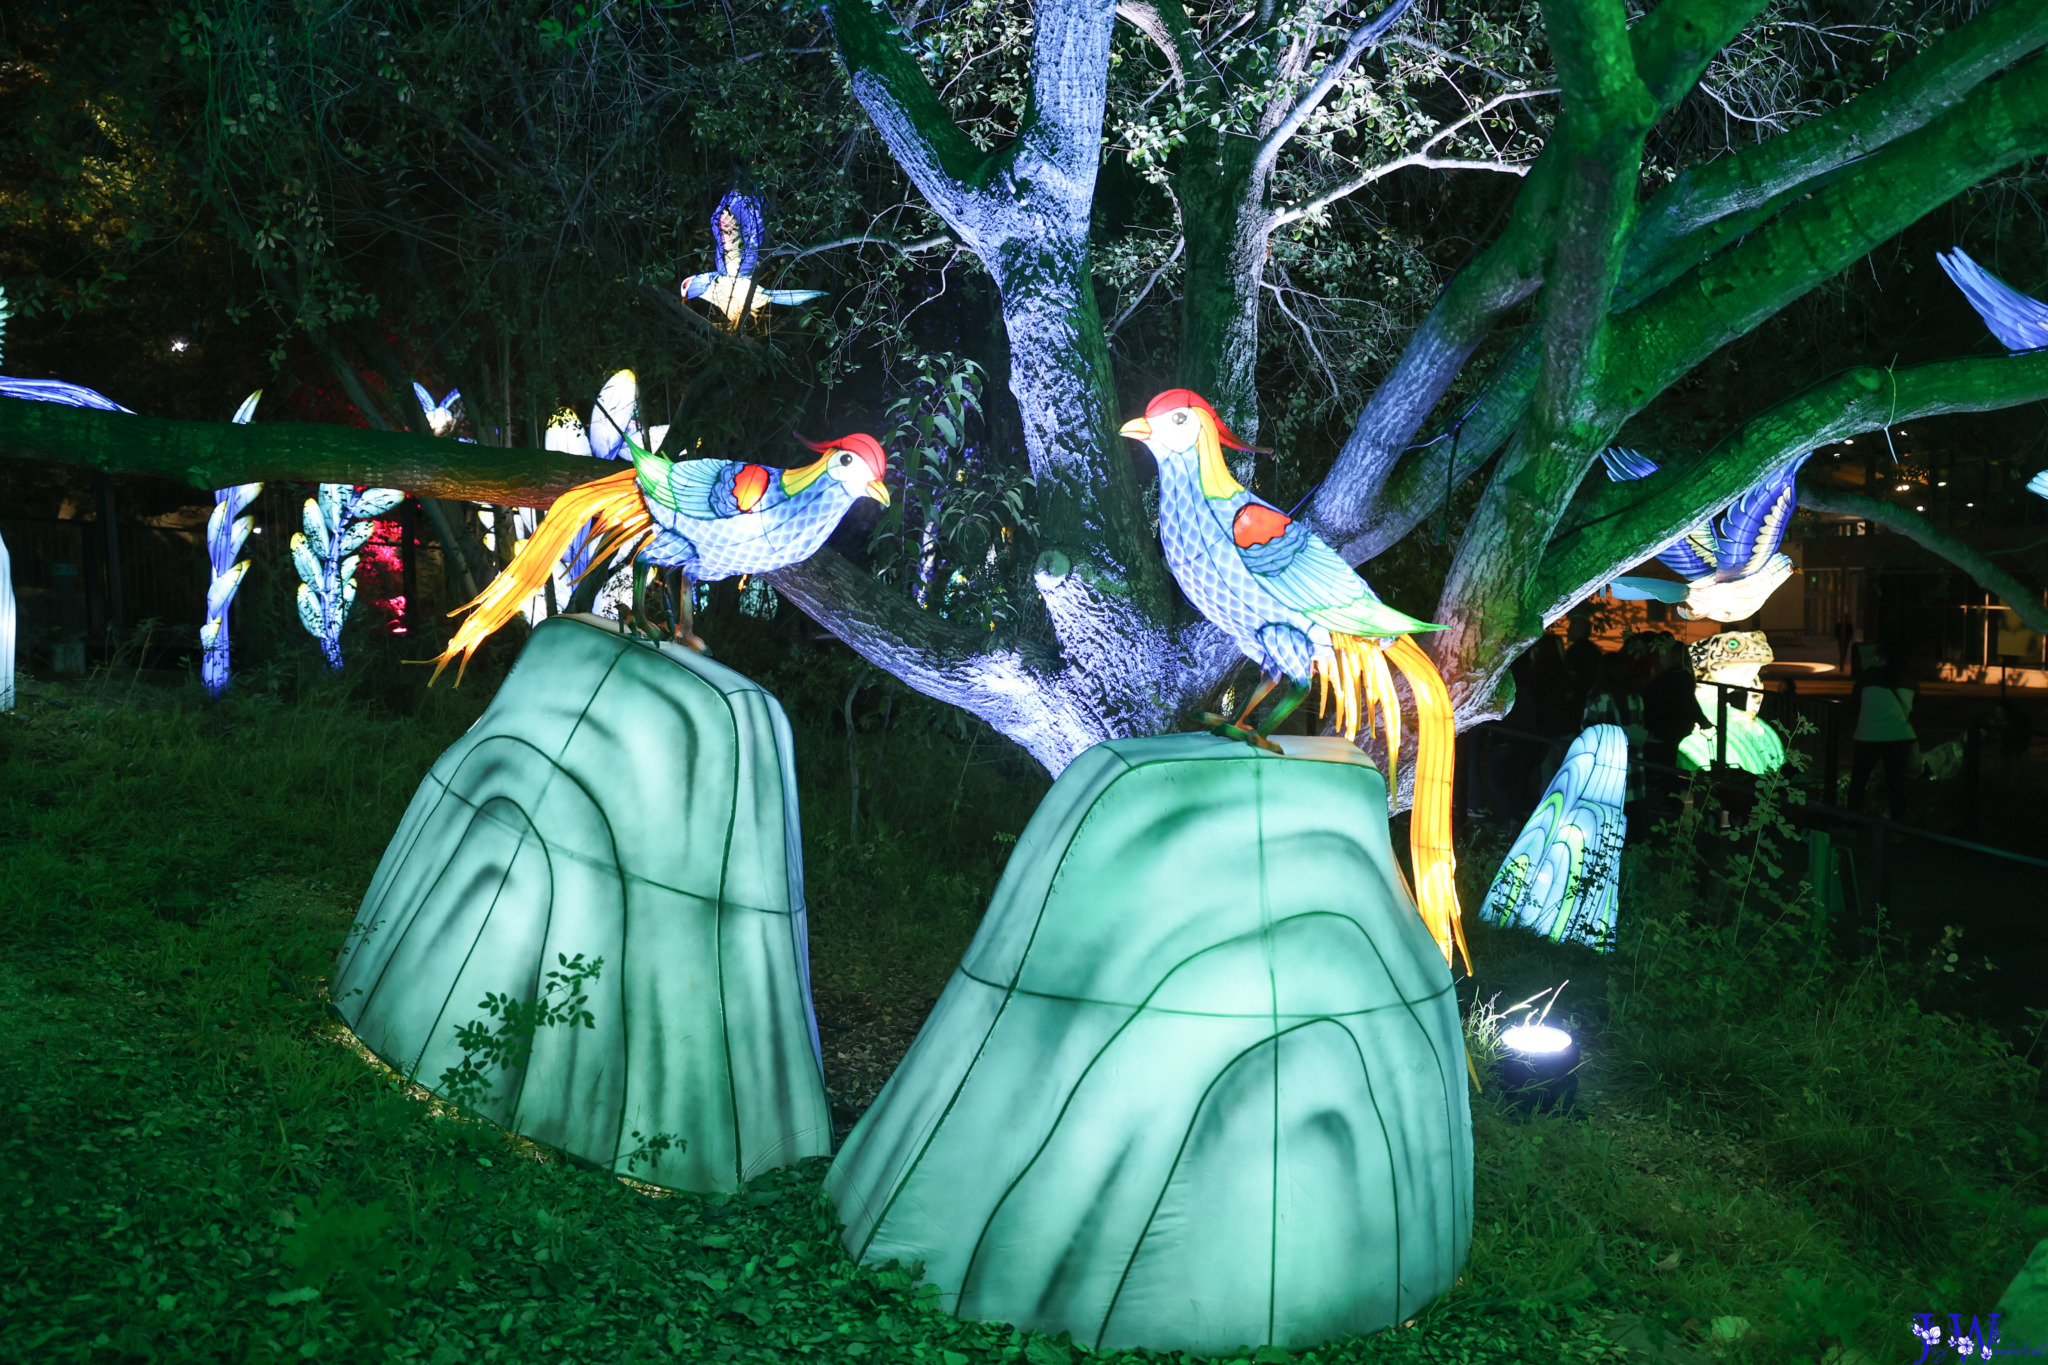 Light displays at LA Zoo in Southern California. Photography by Jaz Wanderlust.